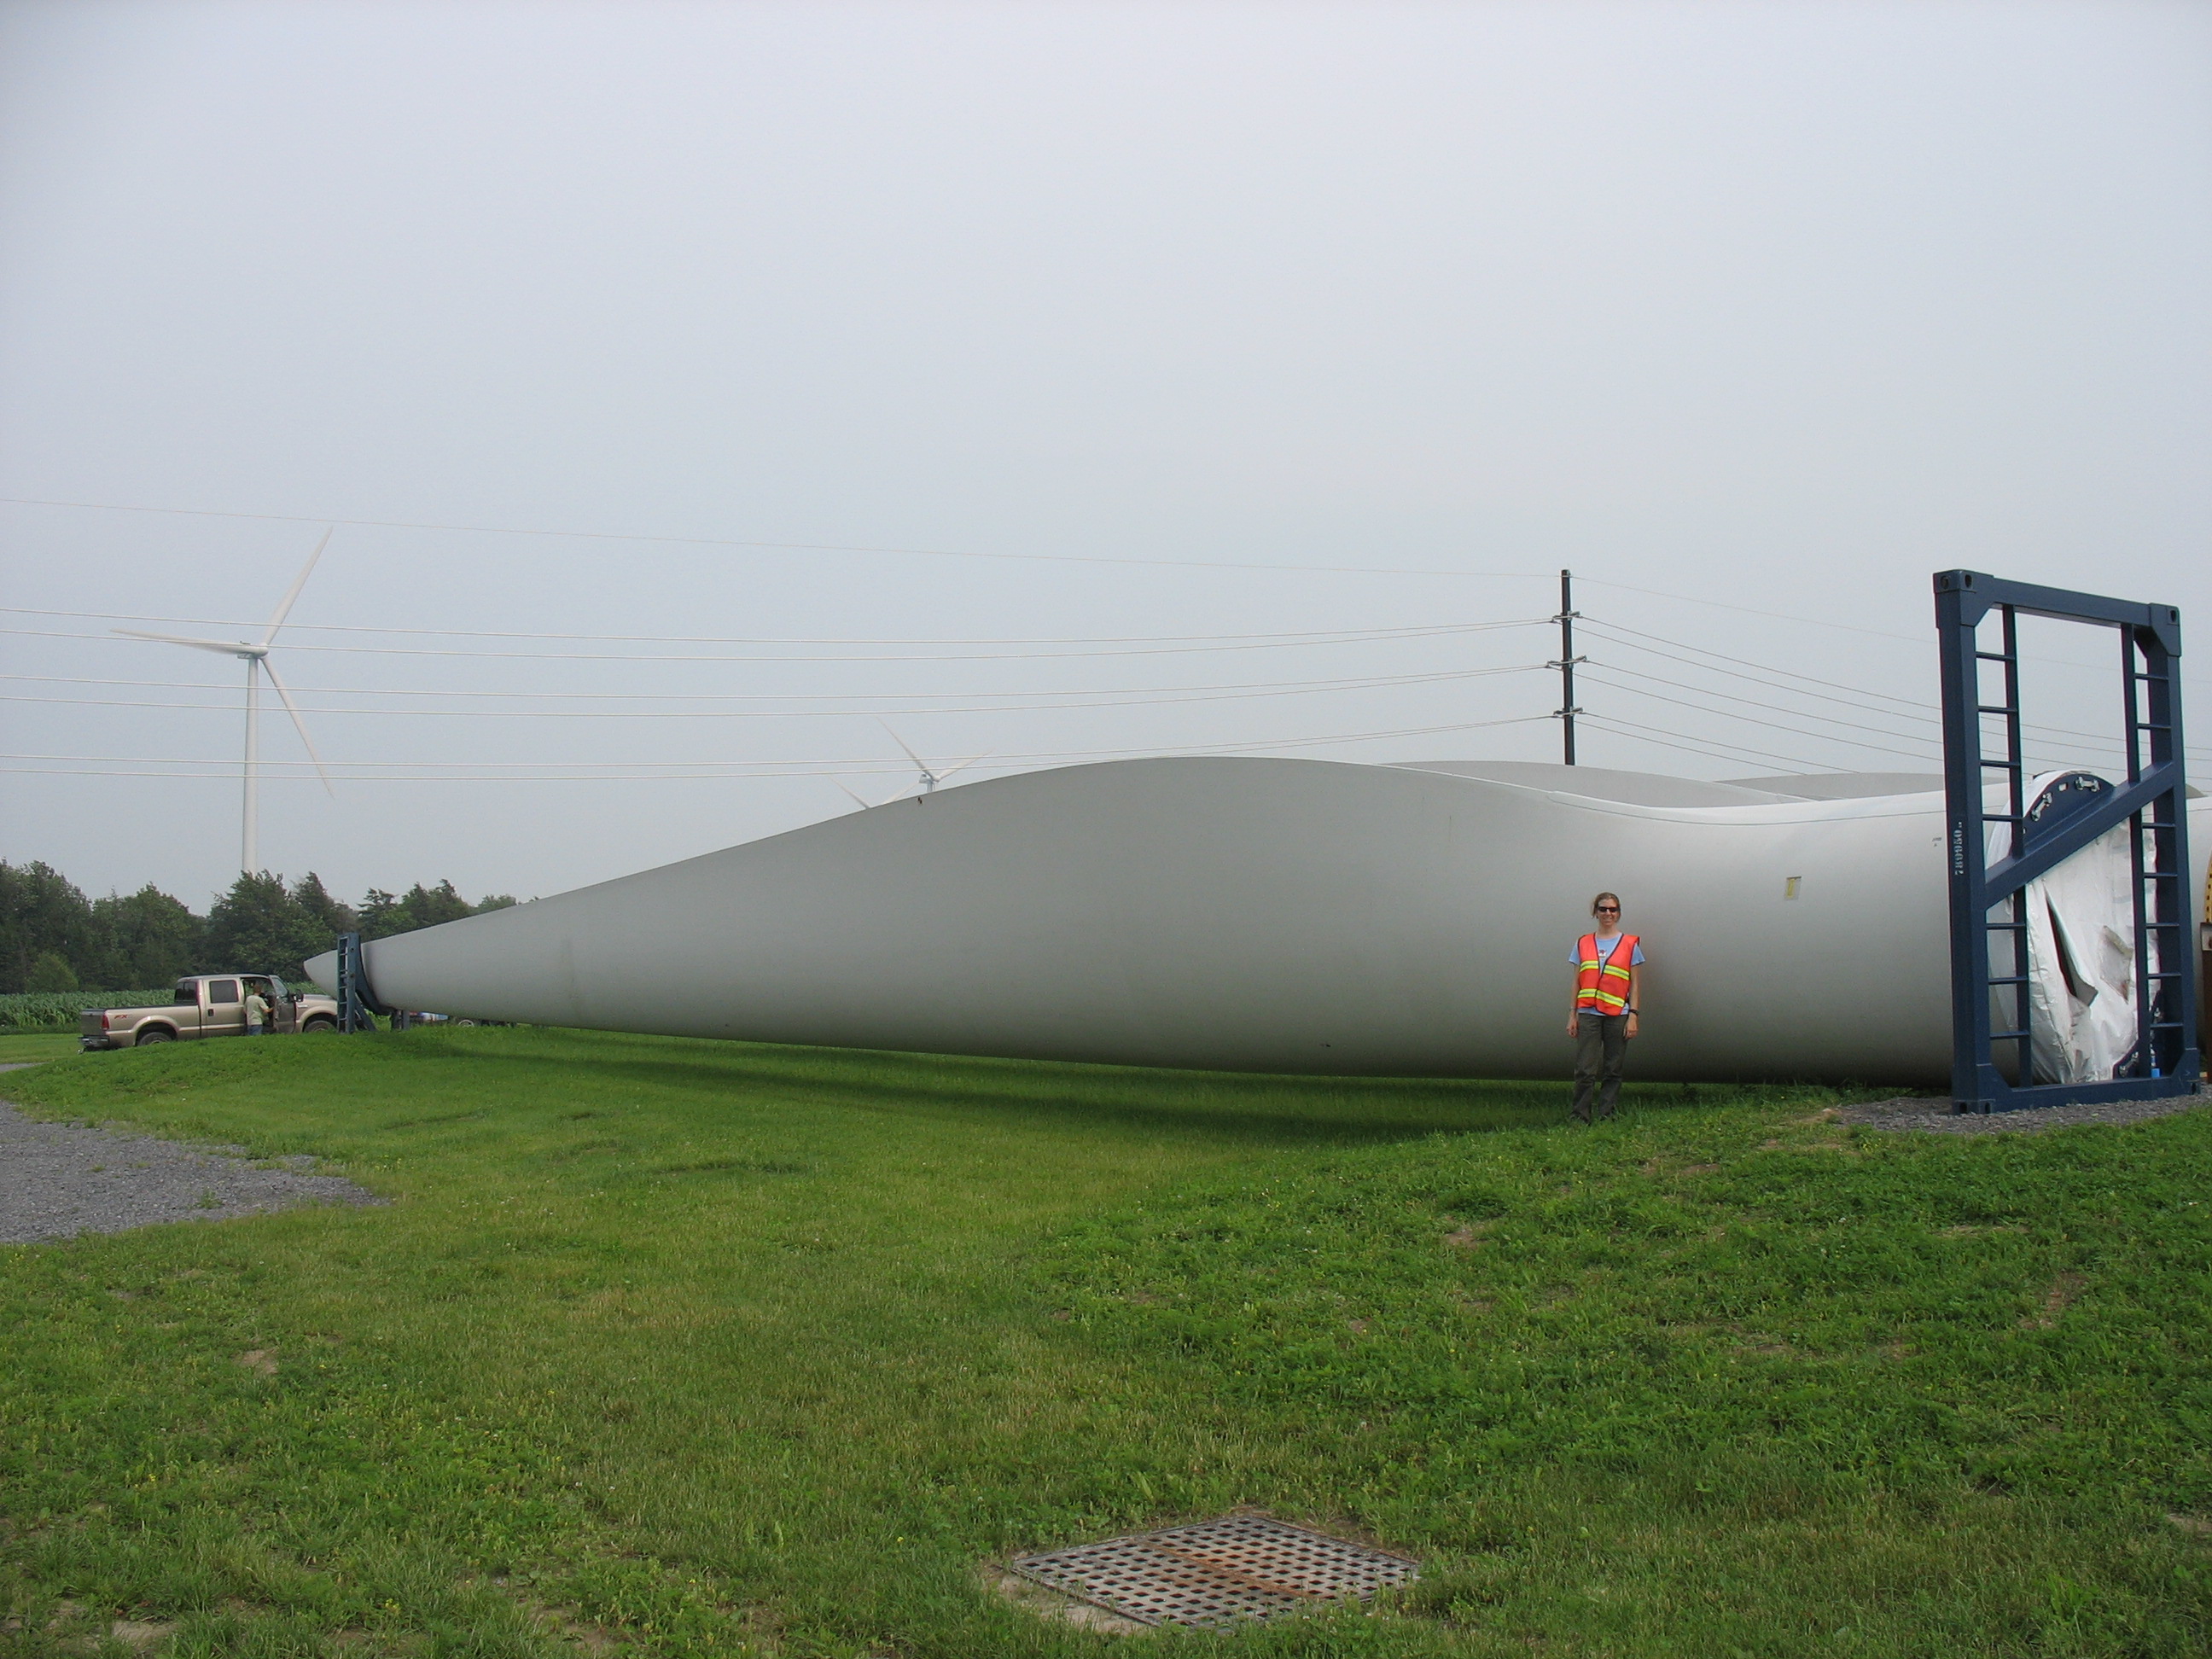 Wind Technology Brings US Closer to Clean Energy Future